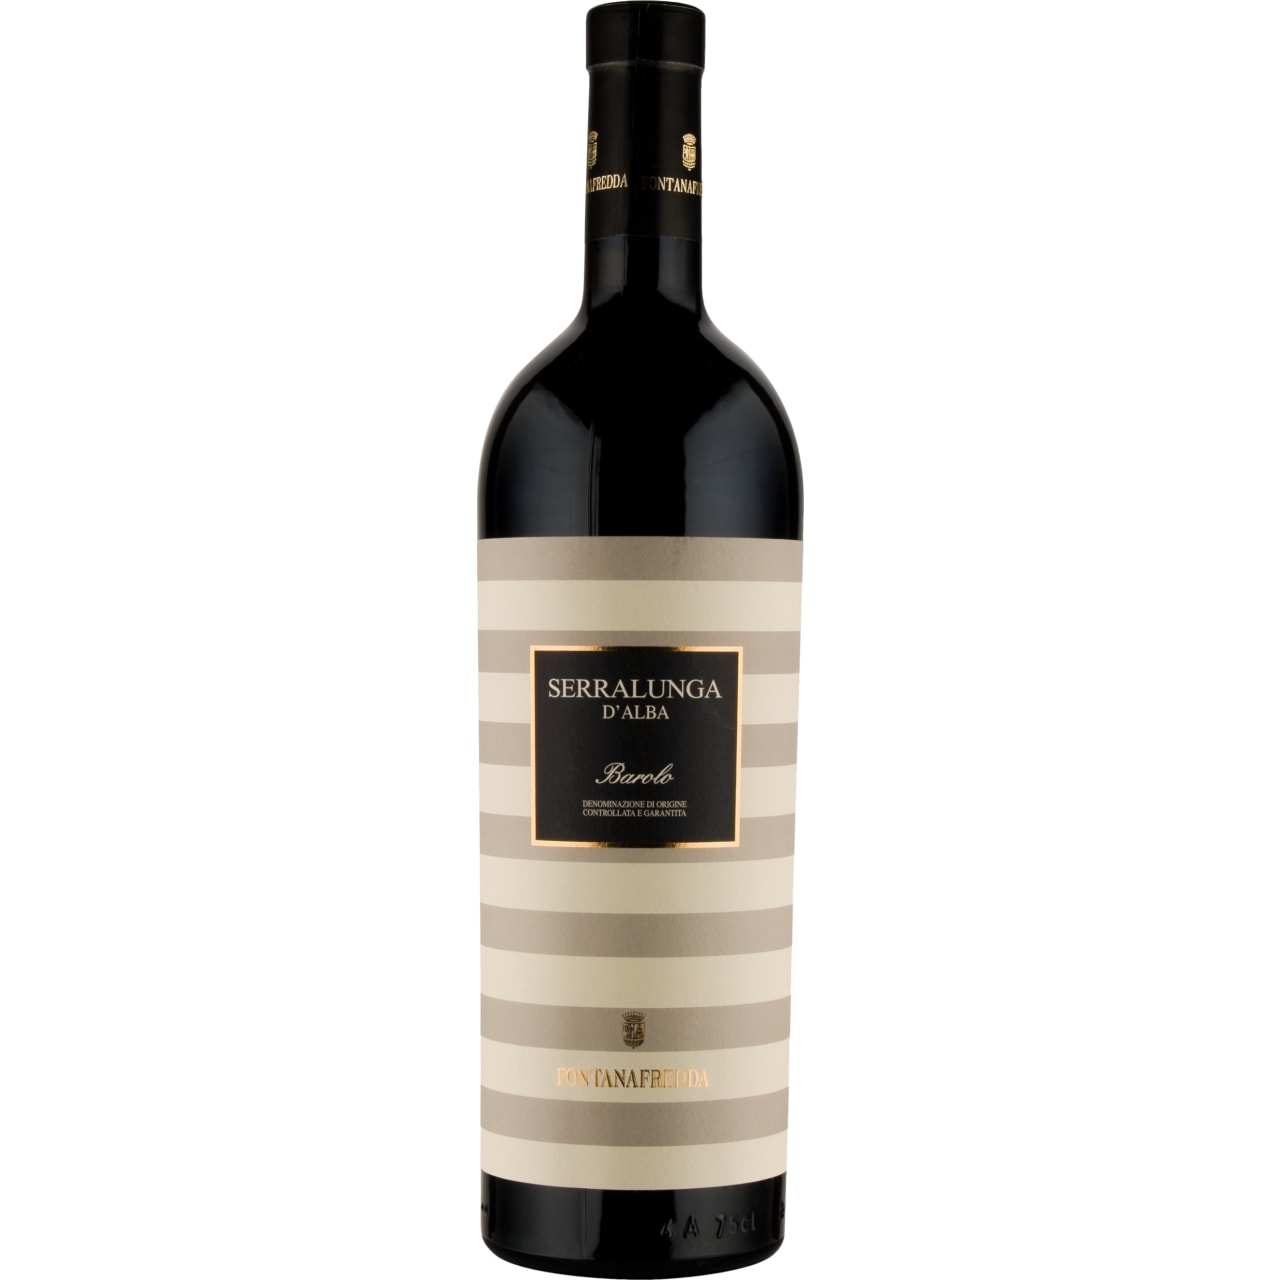 Deep red with ruby highlights, this superb Barolo has a clear-cut, intense nose with overtones of vanilla, spices, withered roses and underbrush.